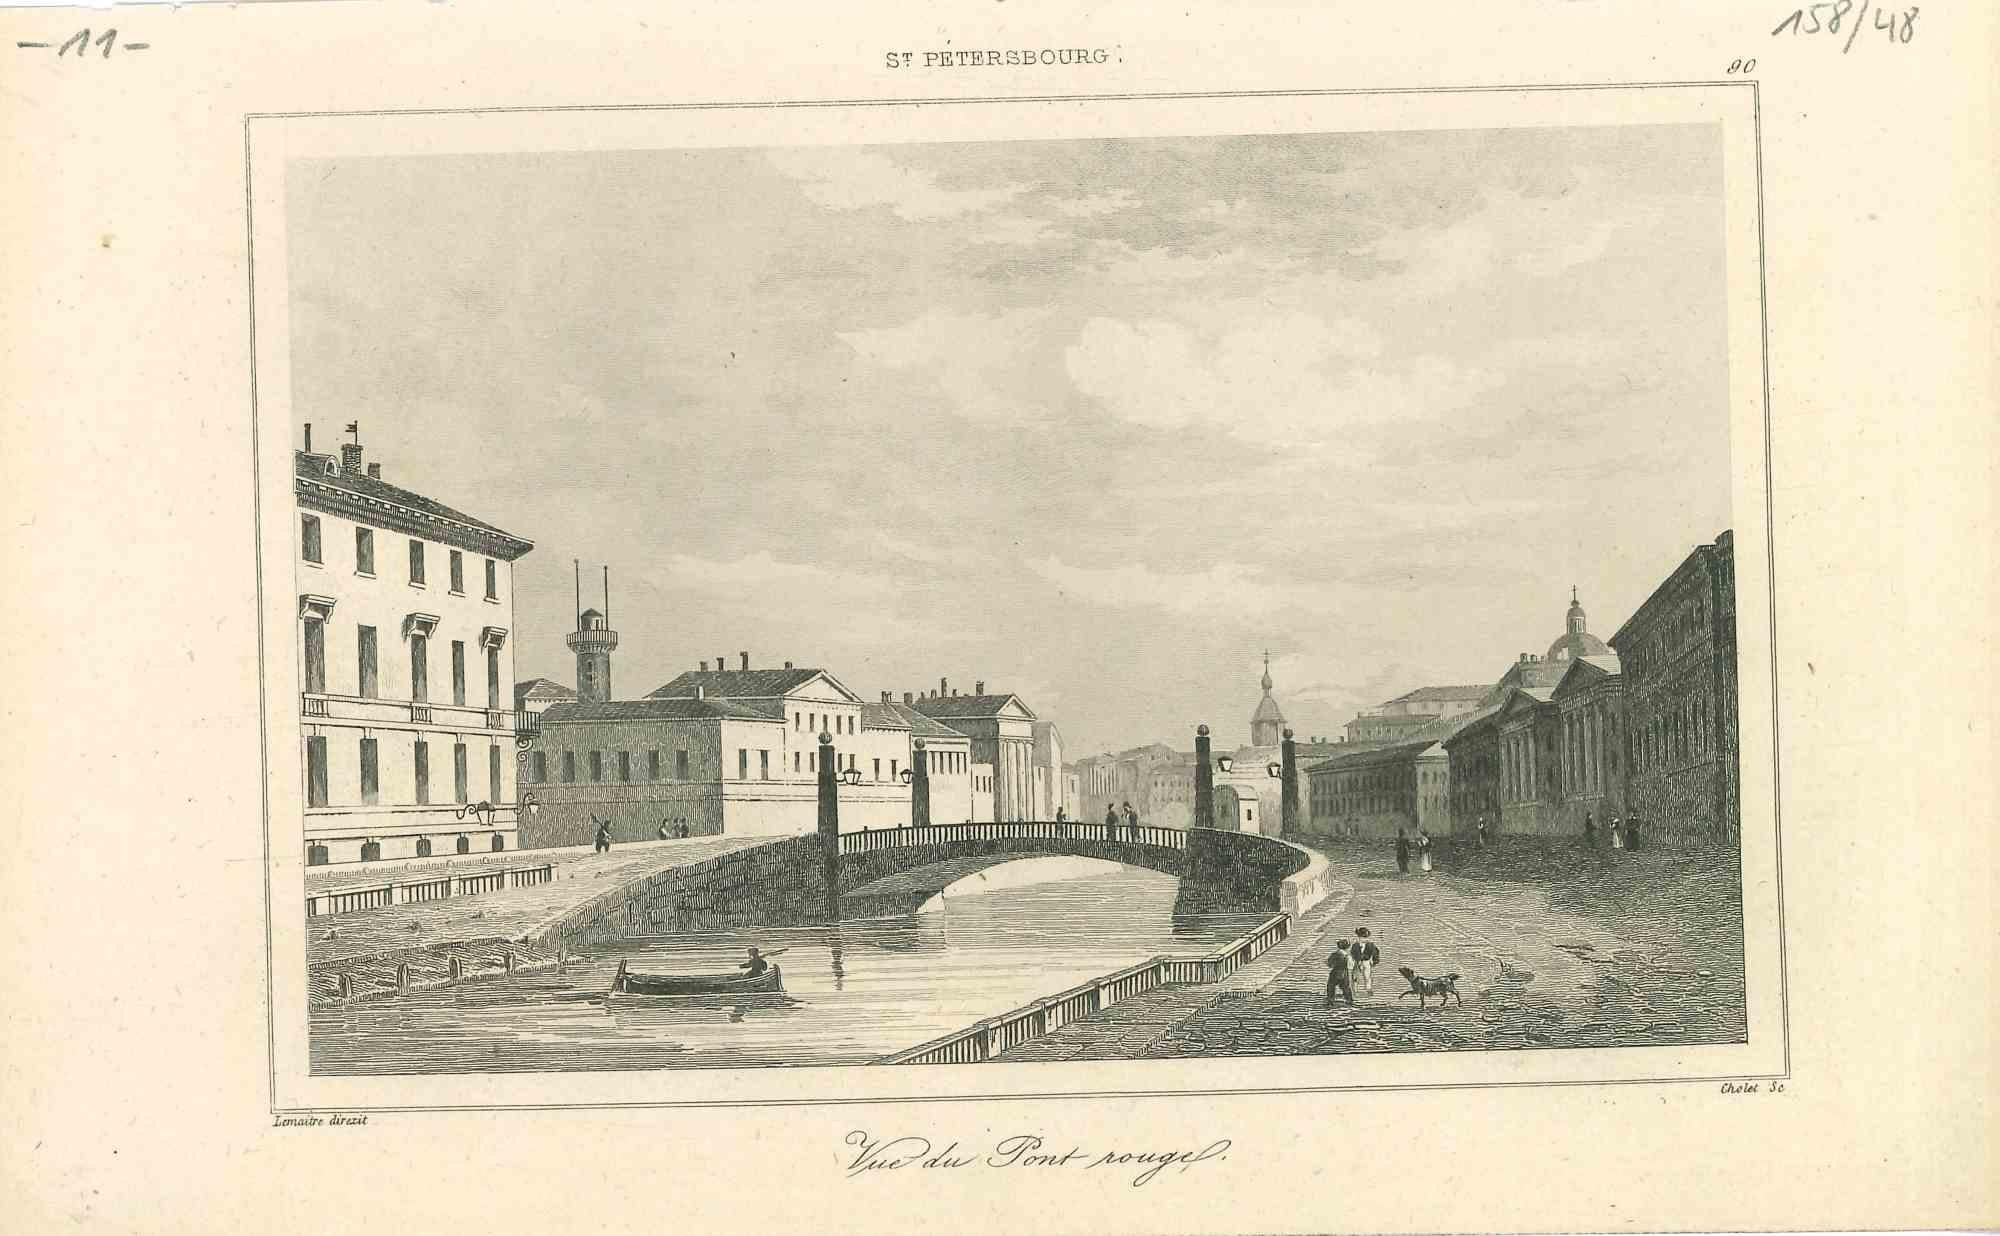 Unknown Figurative Print - Ancient View of Pont Rouge in Saint Petersburg  - Original Lithograph - 1850s